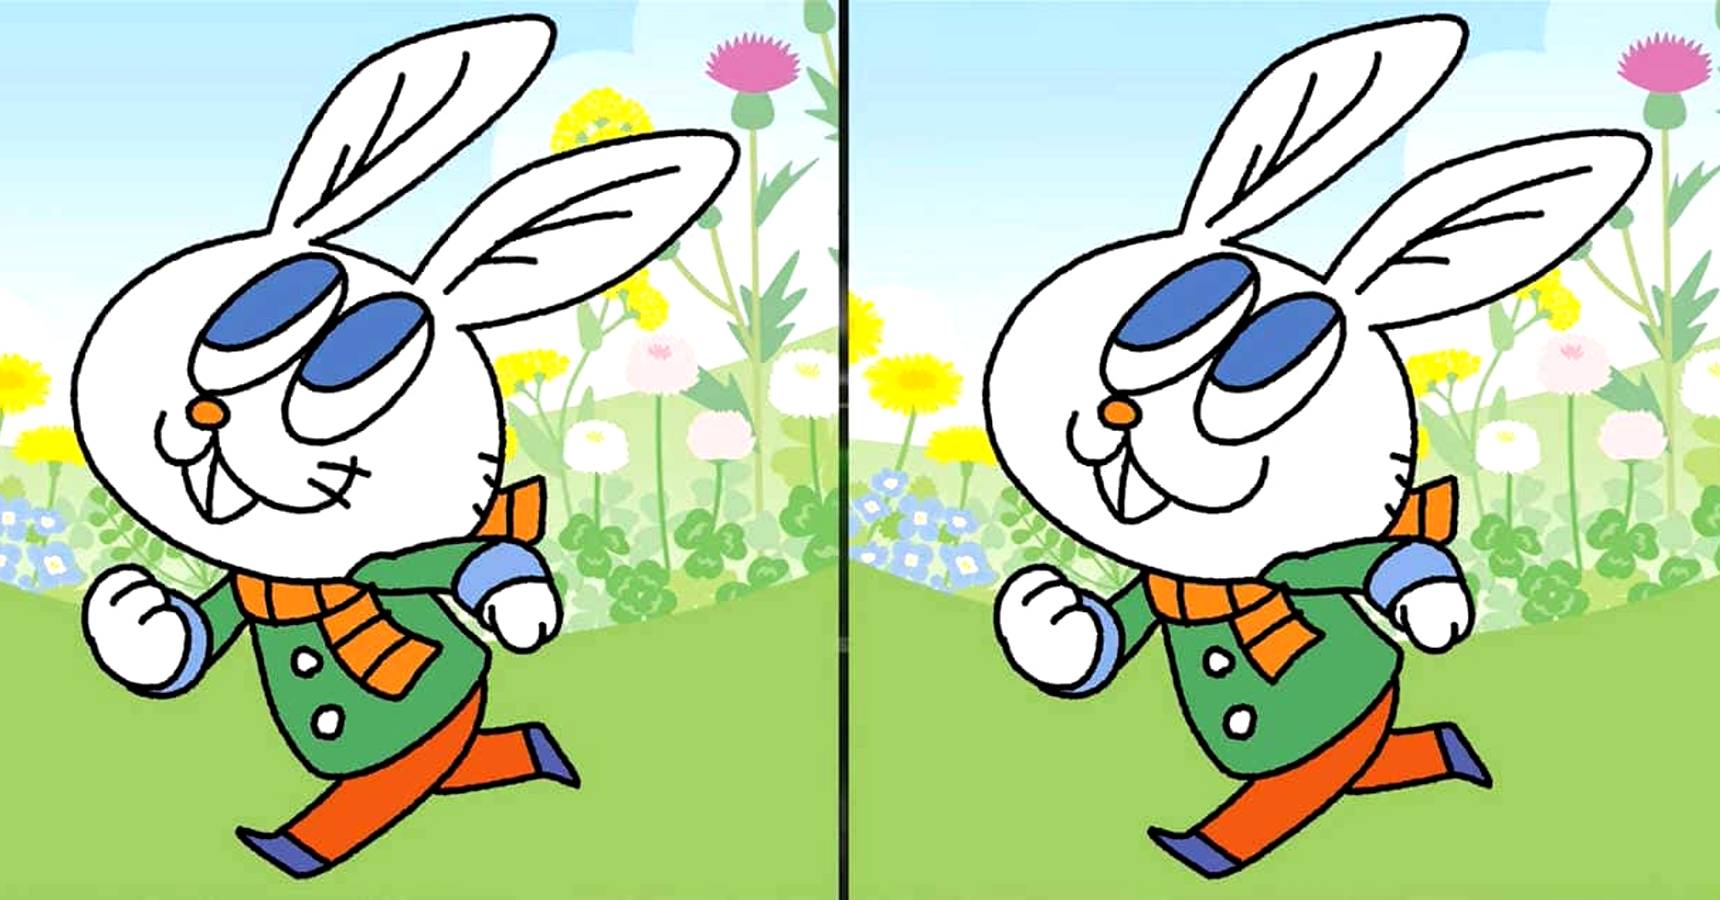 Brain teaser, Brain teaser rabbit, Brain teaser find the difference between the rabbits